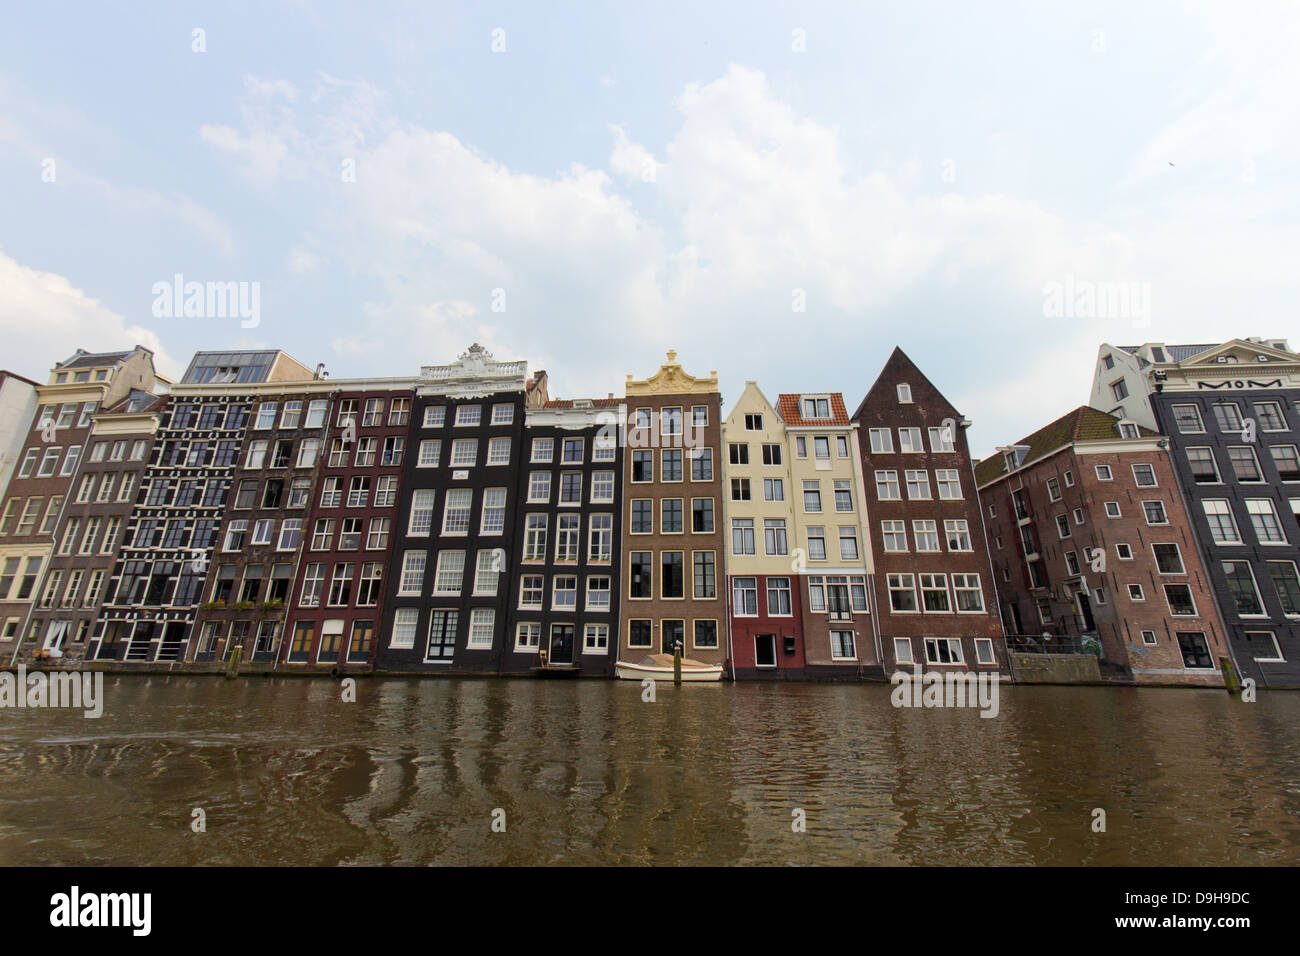 Amsterdam canal houses  Stock Photo